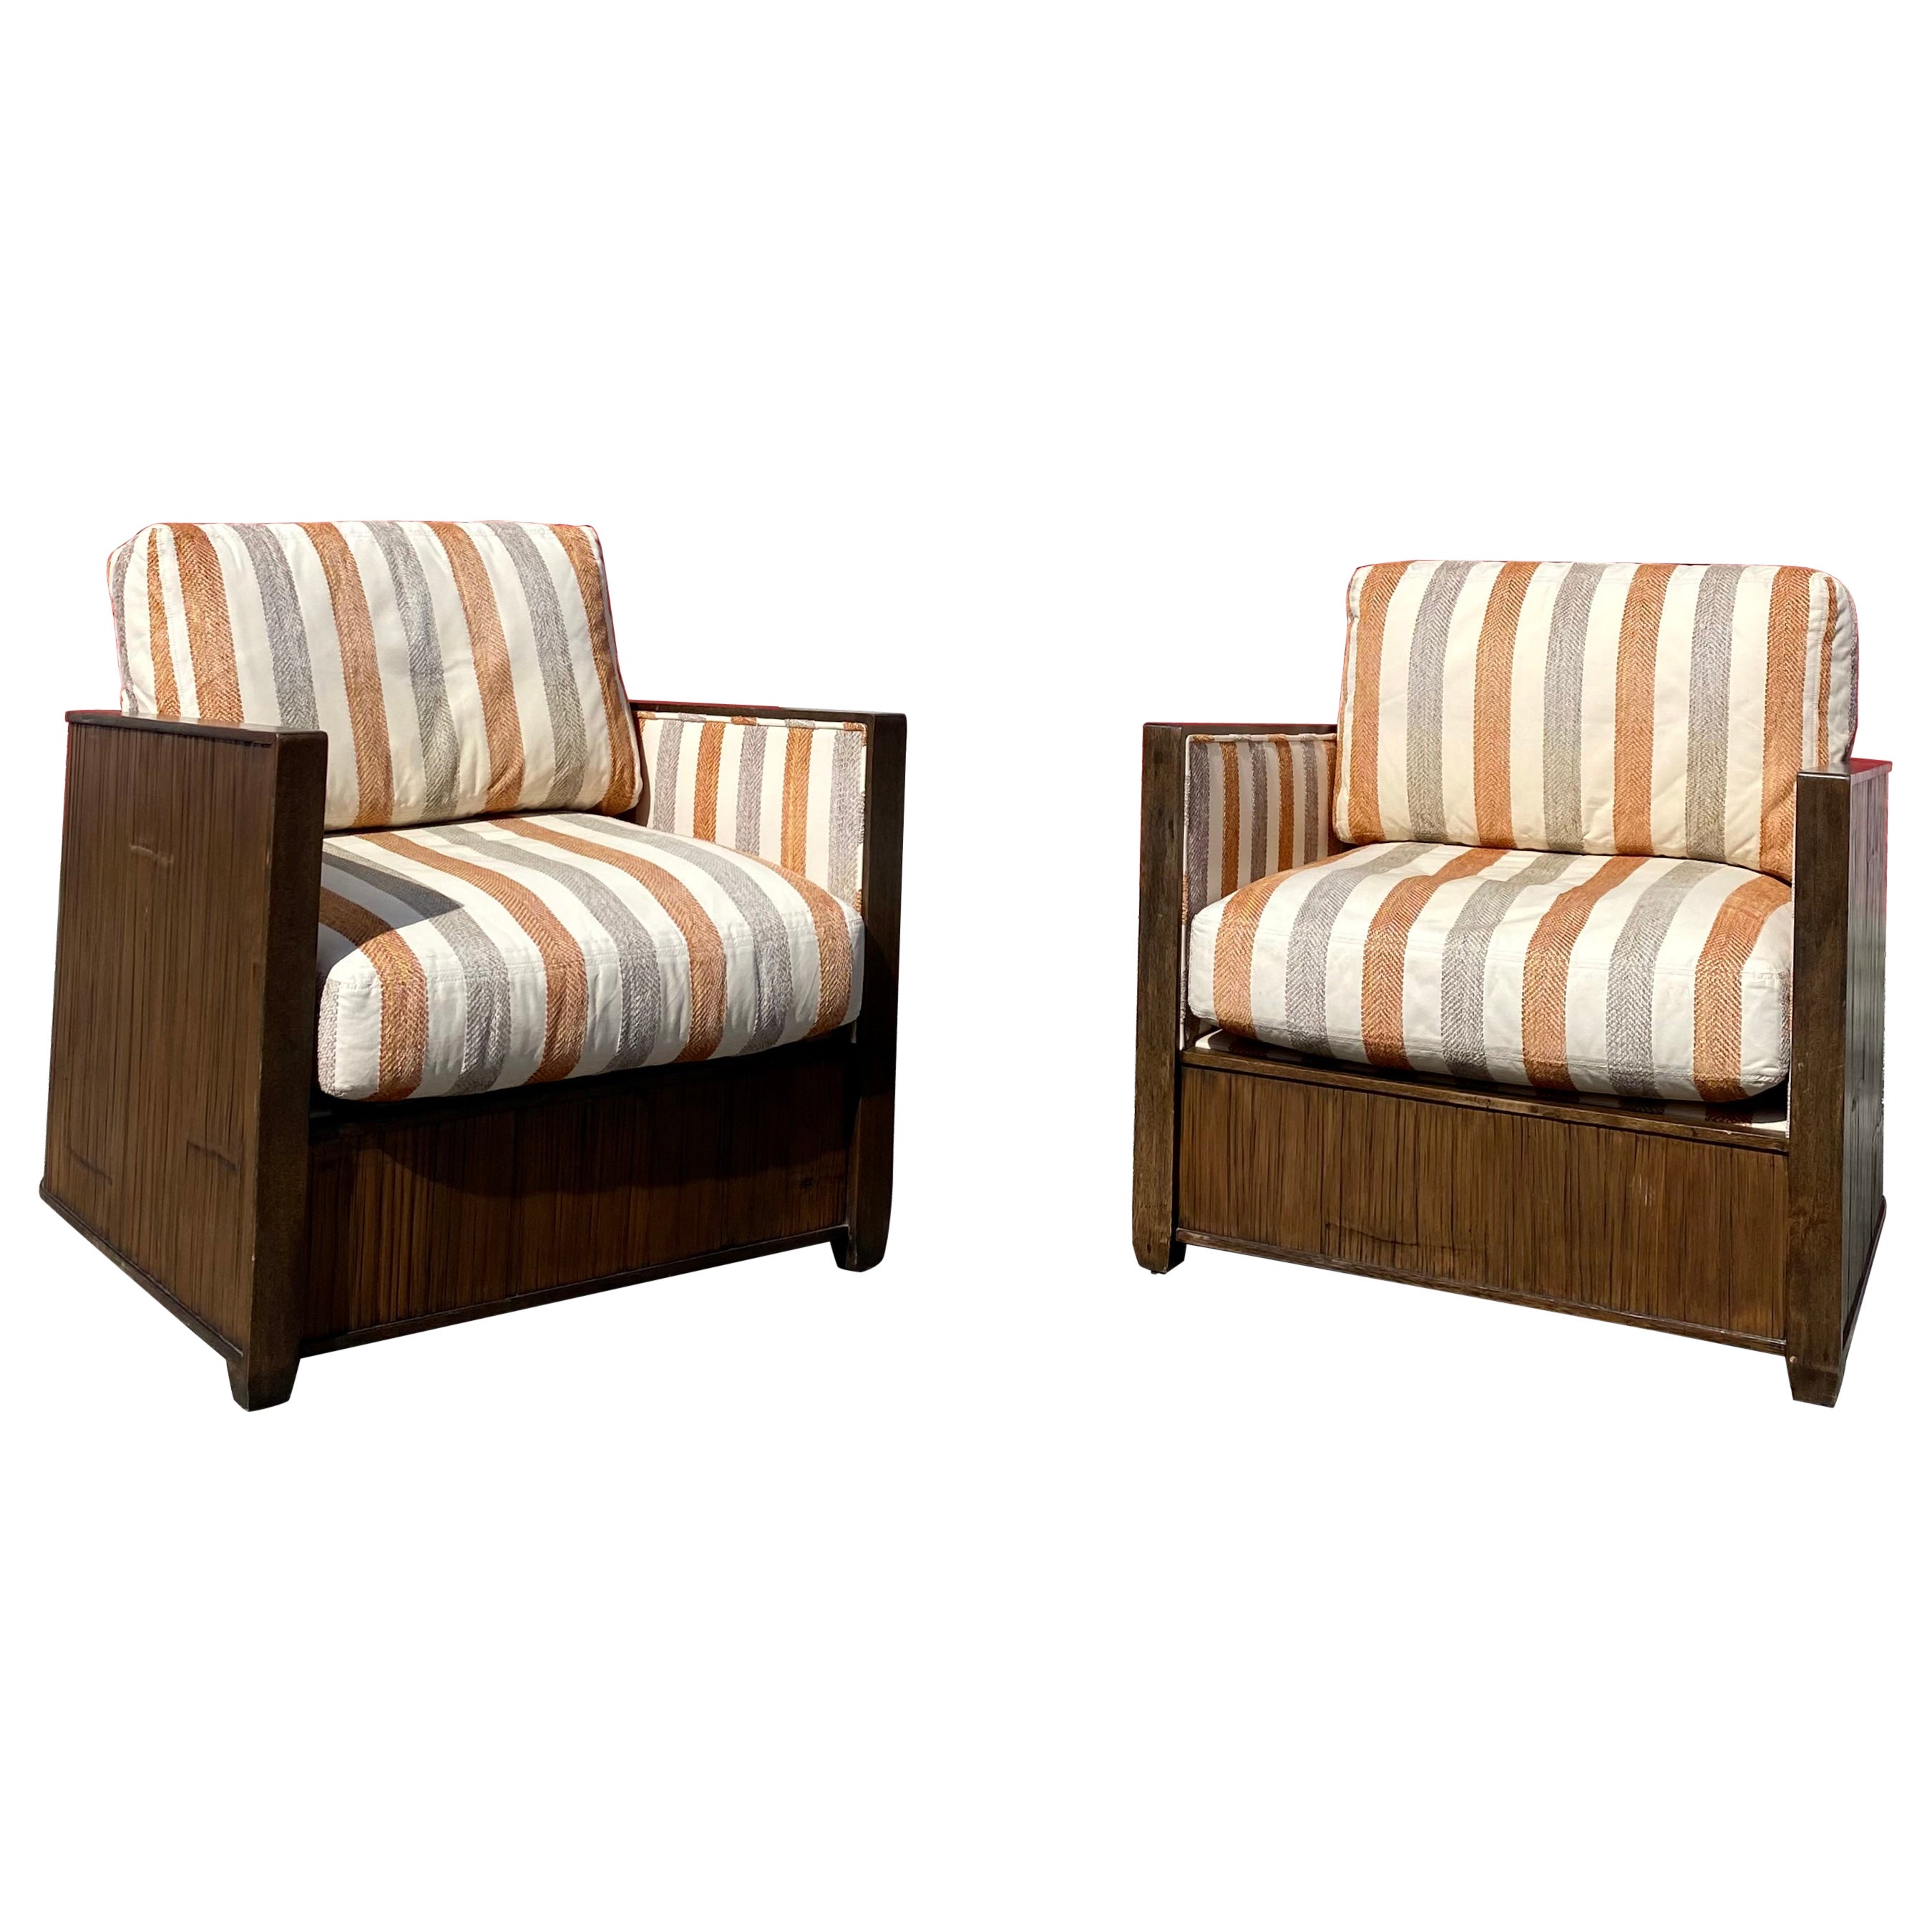 1990s Mcguire Art Deco Style Wood Case Club Chairs, Set of 2 For Sale